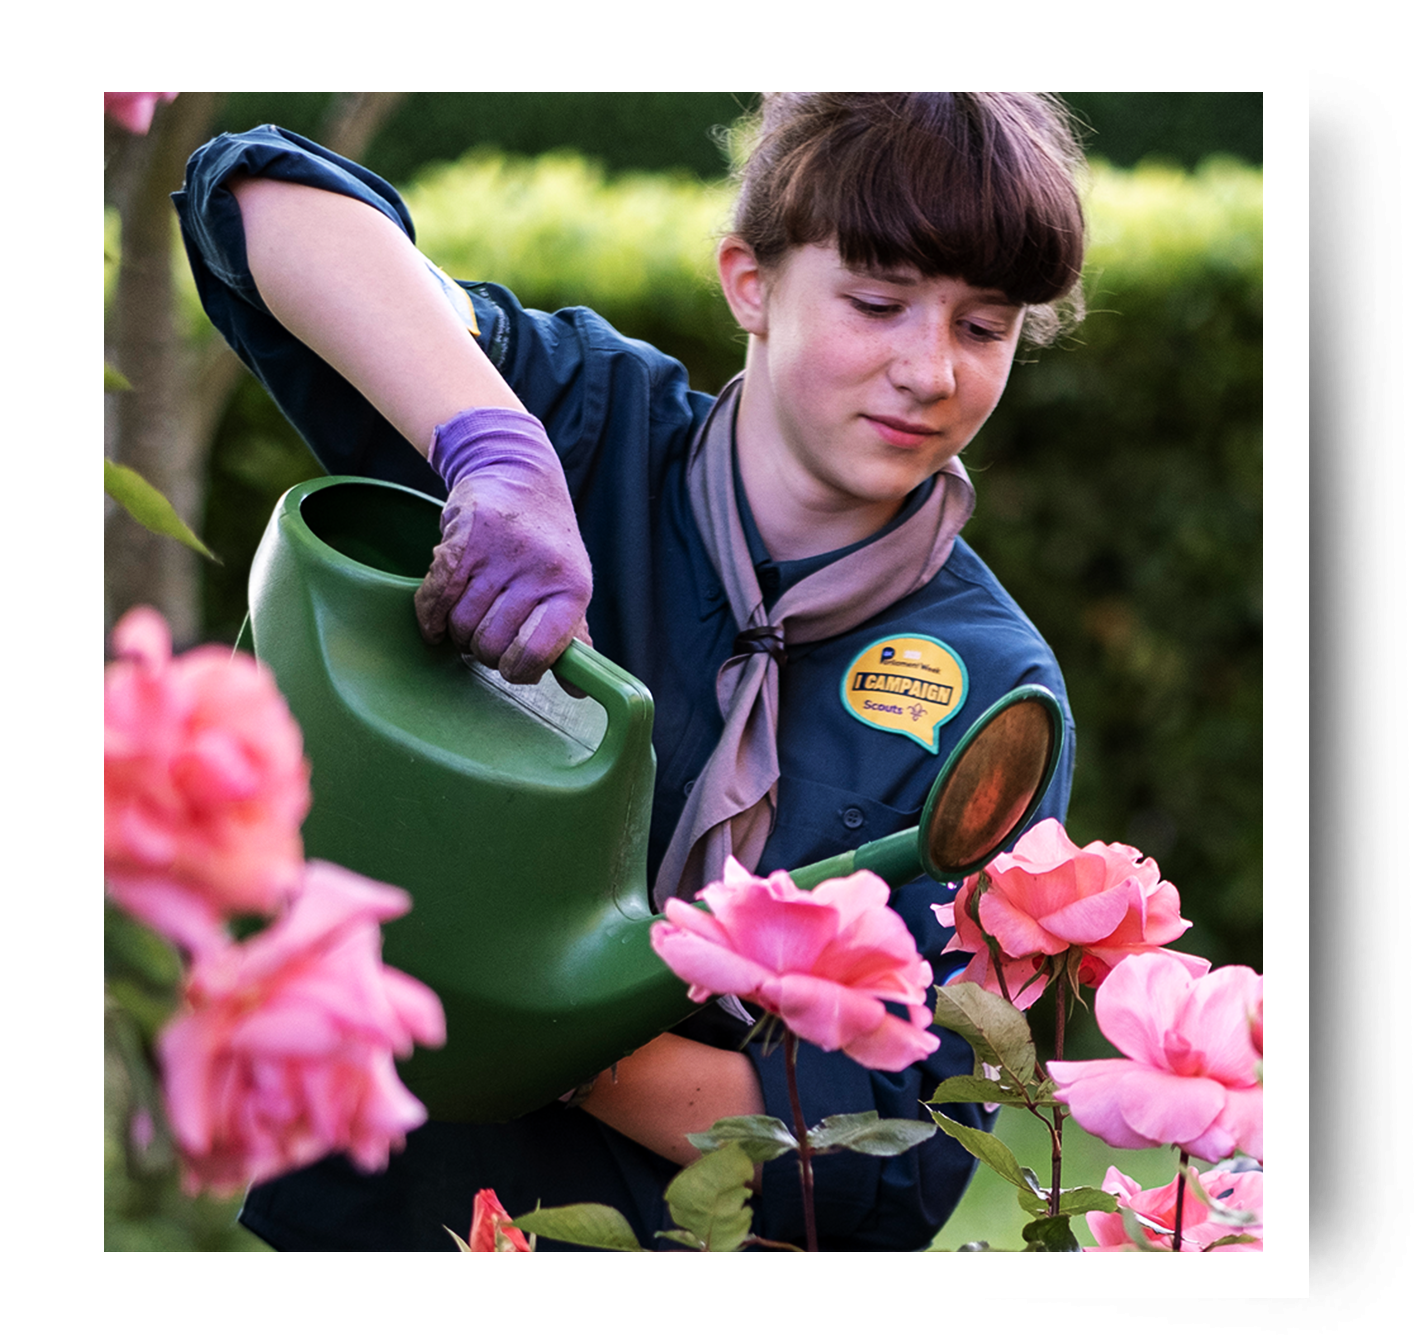 A Scout is outside wearing purple gloves and holding a watering can above pink flowers.